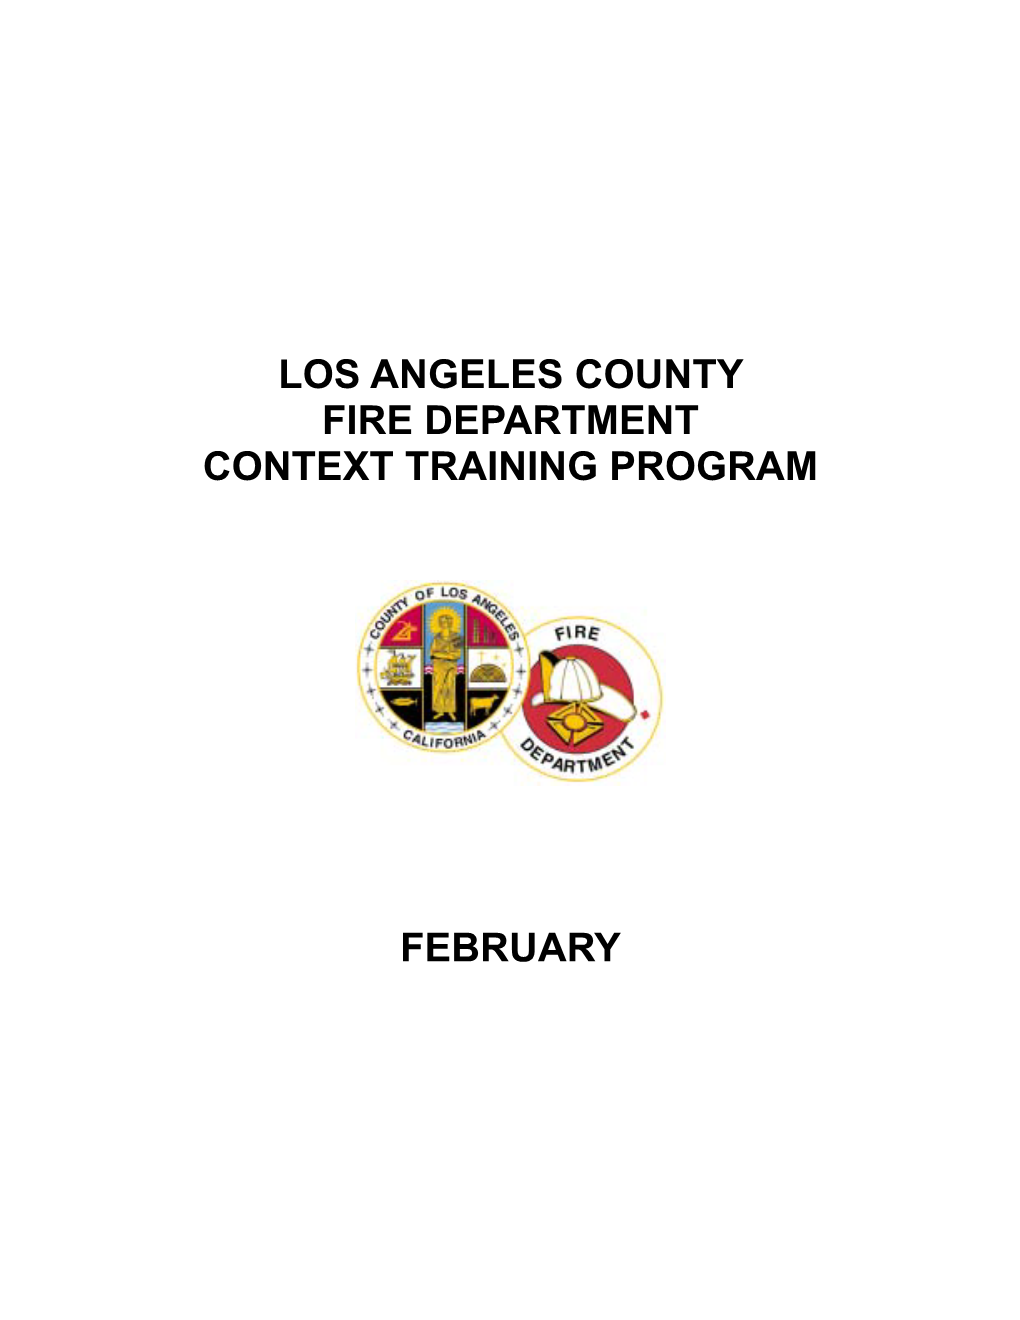 Los Angeles County Fire Department Context Training Program February